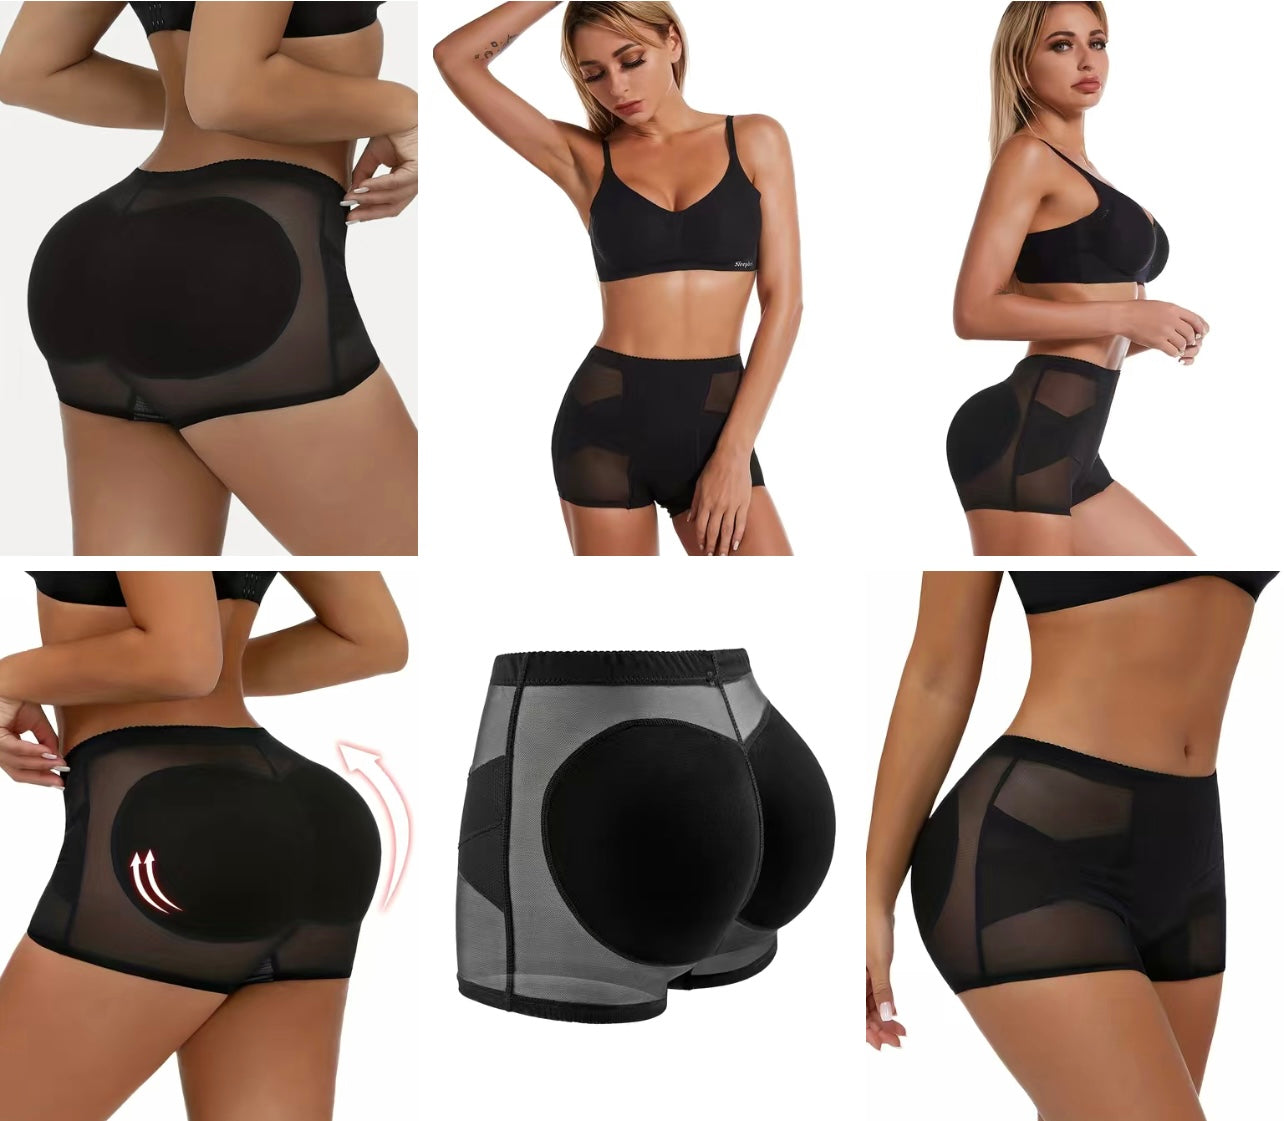  Seamless, Padded Butt Lifting Shape Wear. Buttocks Enhancing Sheer panties. High Waist BBL Shorts to and enhance your bootie. Comes in 2 colors Black or Nude. Made of polyester/mesh blend. full coverage, padded underwear. 